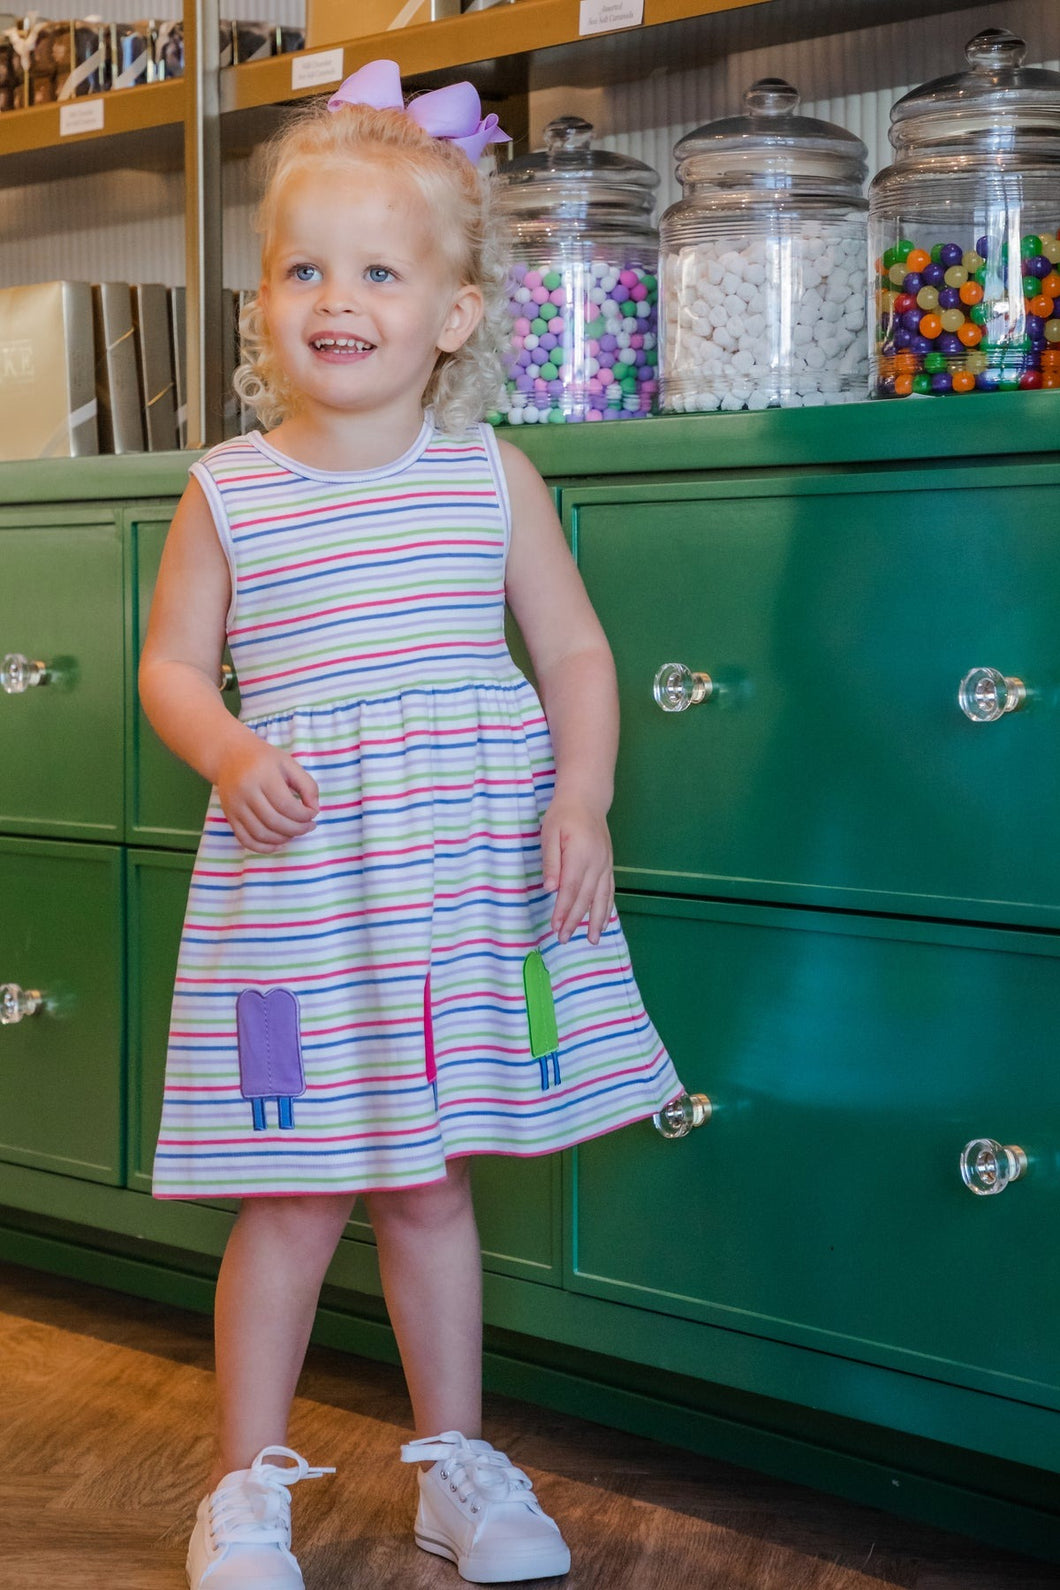 Stripe Knit Dress with Popsicles